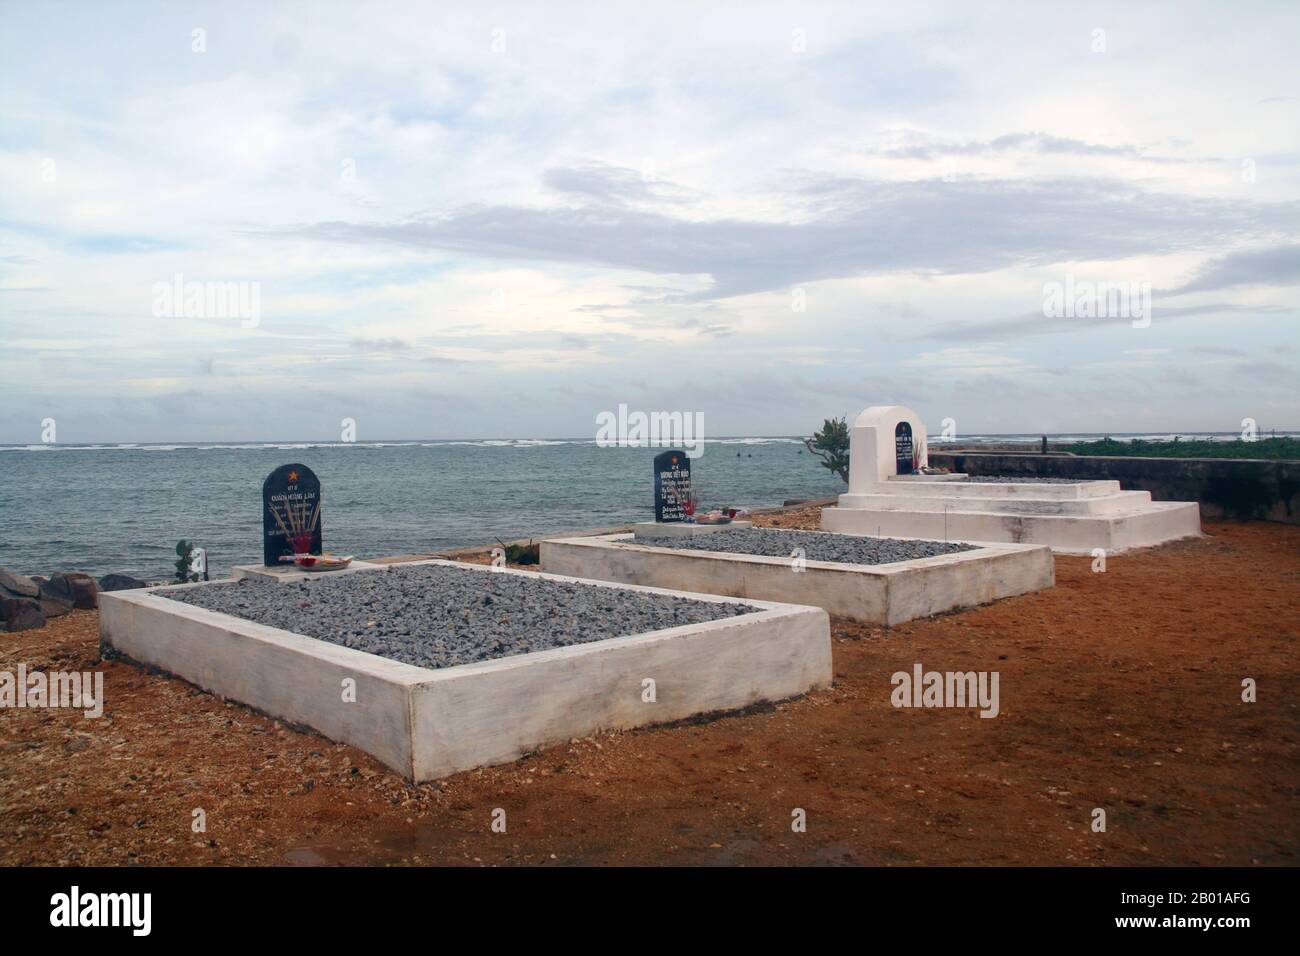 Vietnam: Graves of 'martyrs' (liệt sĩ) at a military cemetery on Đảo Trường Sa or Spratly Island in the Spratly Islands, called Nanwei Dao by China. Photo by Ha Petit (CC BY-SA 3.0 License).  The Spratly Islands are a group of more than 750 reefs, iislets, atolls, cays and islands in the South China Sea. The archipelago lies off the coasts of the Philippines and Malaysia (Sabah), about one third of the way to southern Vietnam. They comprise less than four square kilometers of land area spread over more than 425,000 square kilometers of sea. Stock Photo